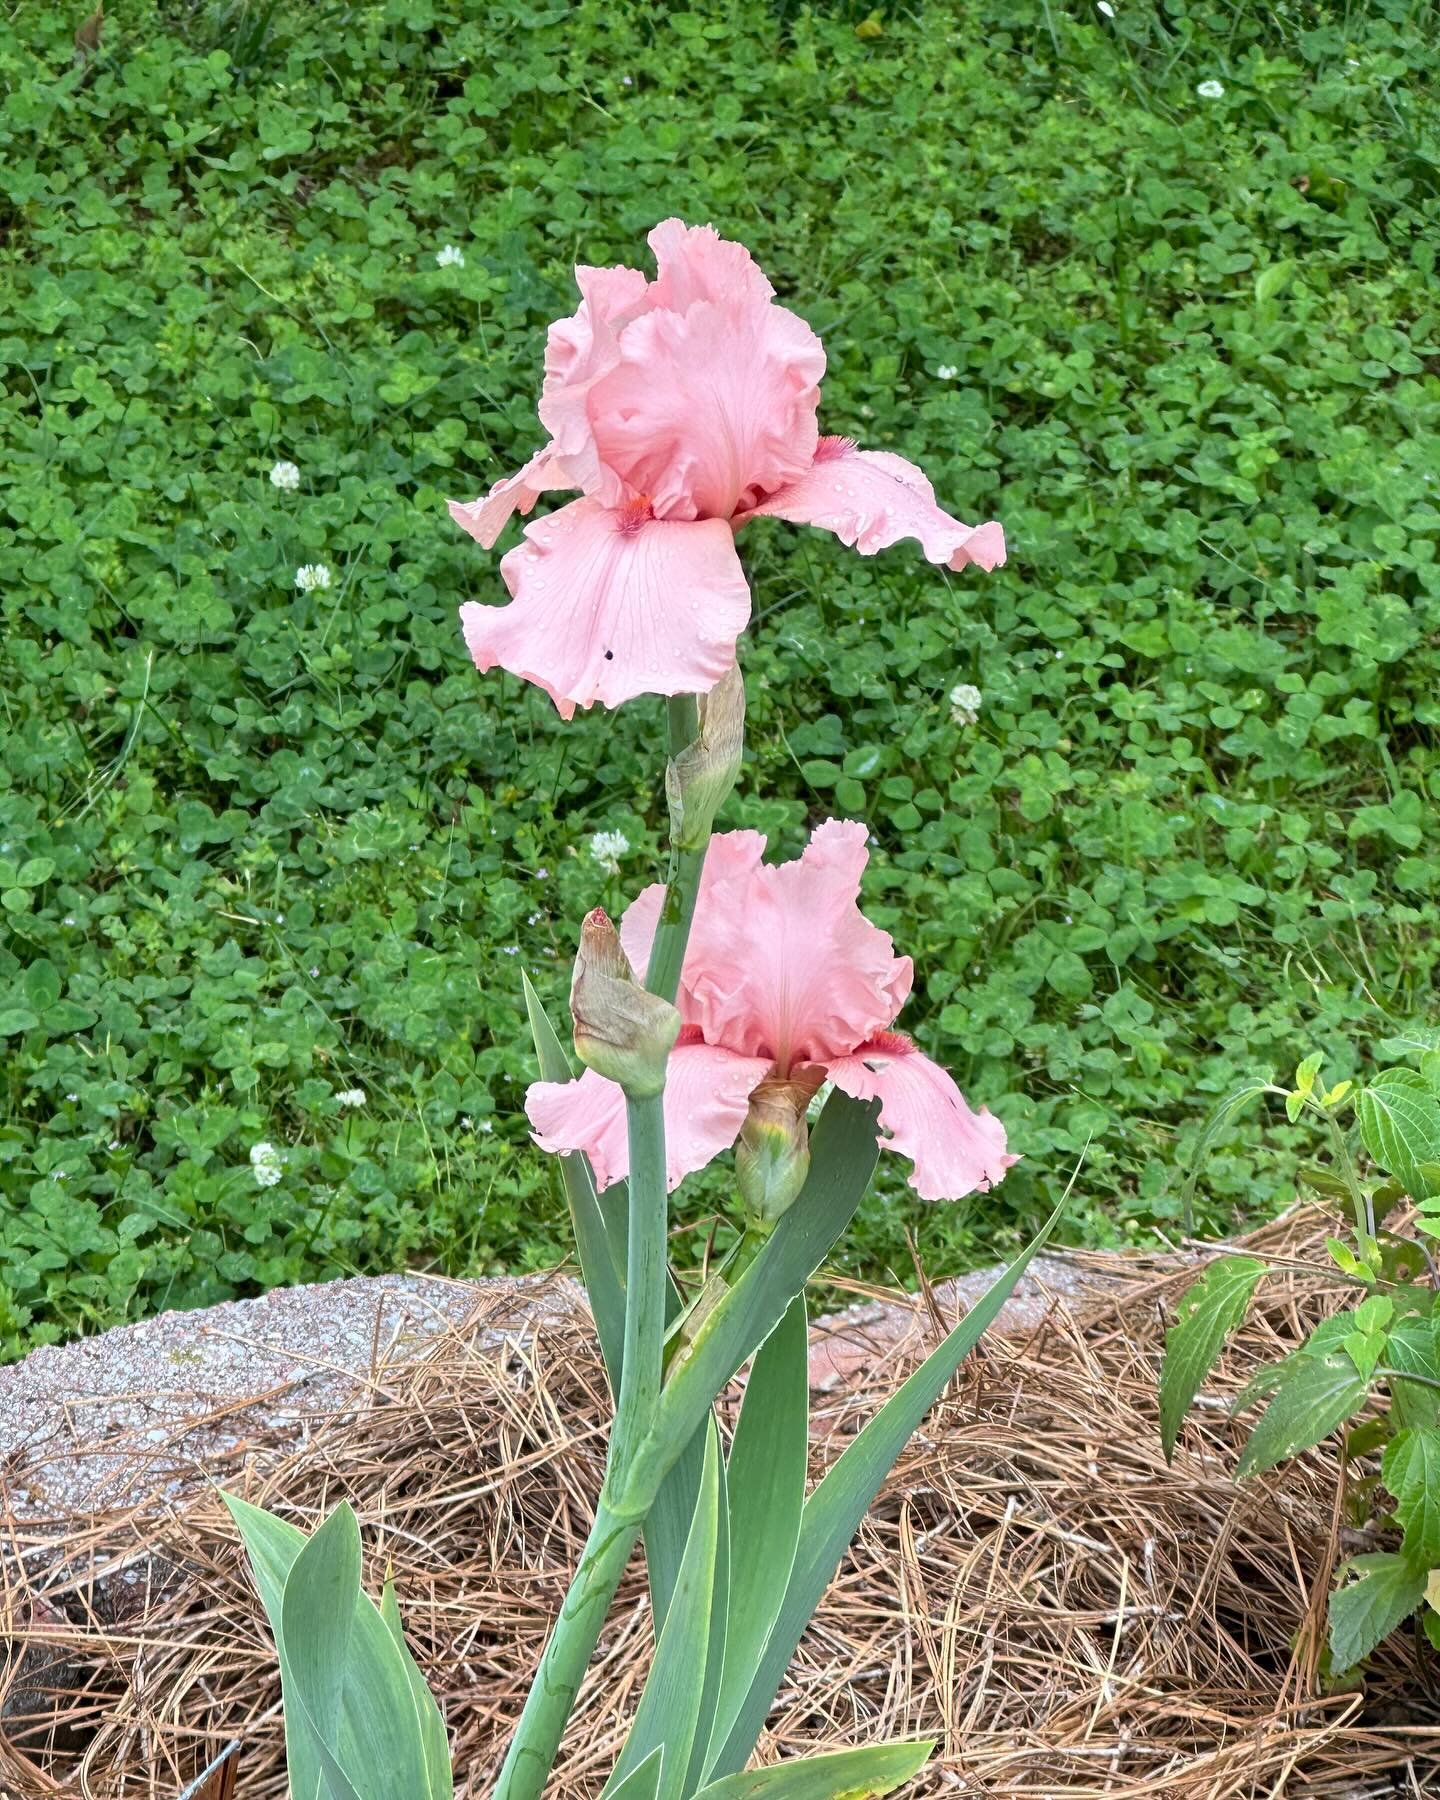 &lsquo;I Pink I Can&rsquo;  Another one of my new Iris from @schreinersgardens !!

Love the color!!

#beardediris #iris #gardenblogger #flowerblogger